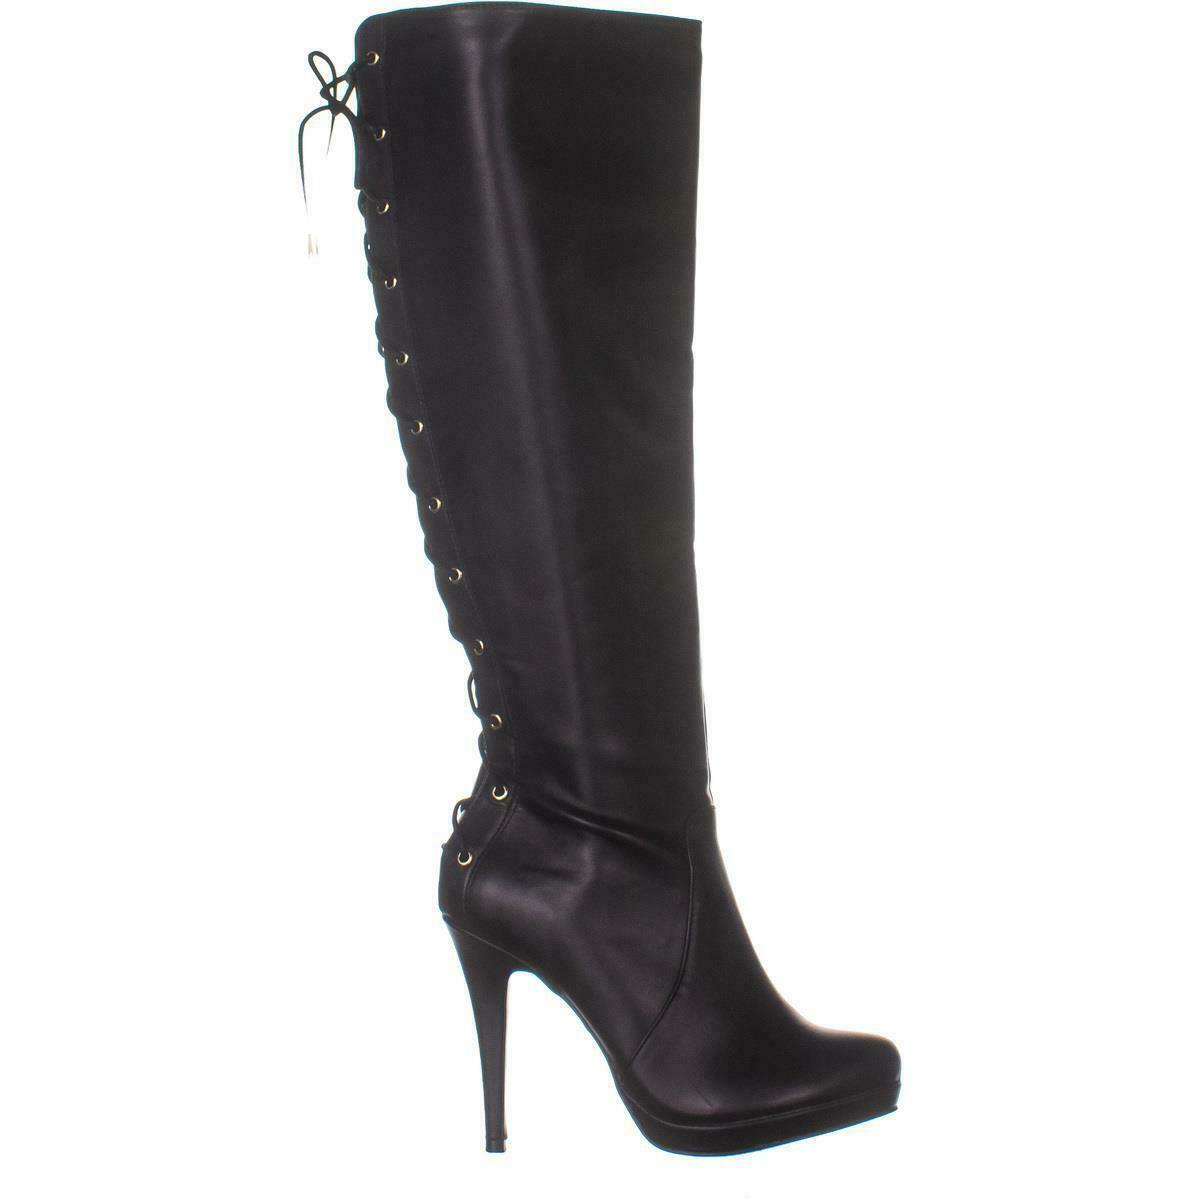 TS35 Lanee Wide Calf Lace Up Knee High Boots 773, Black, 7 W US - Boots